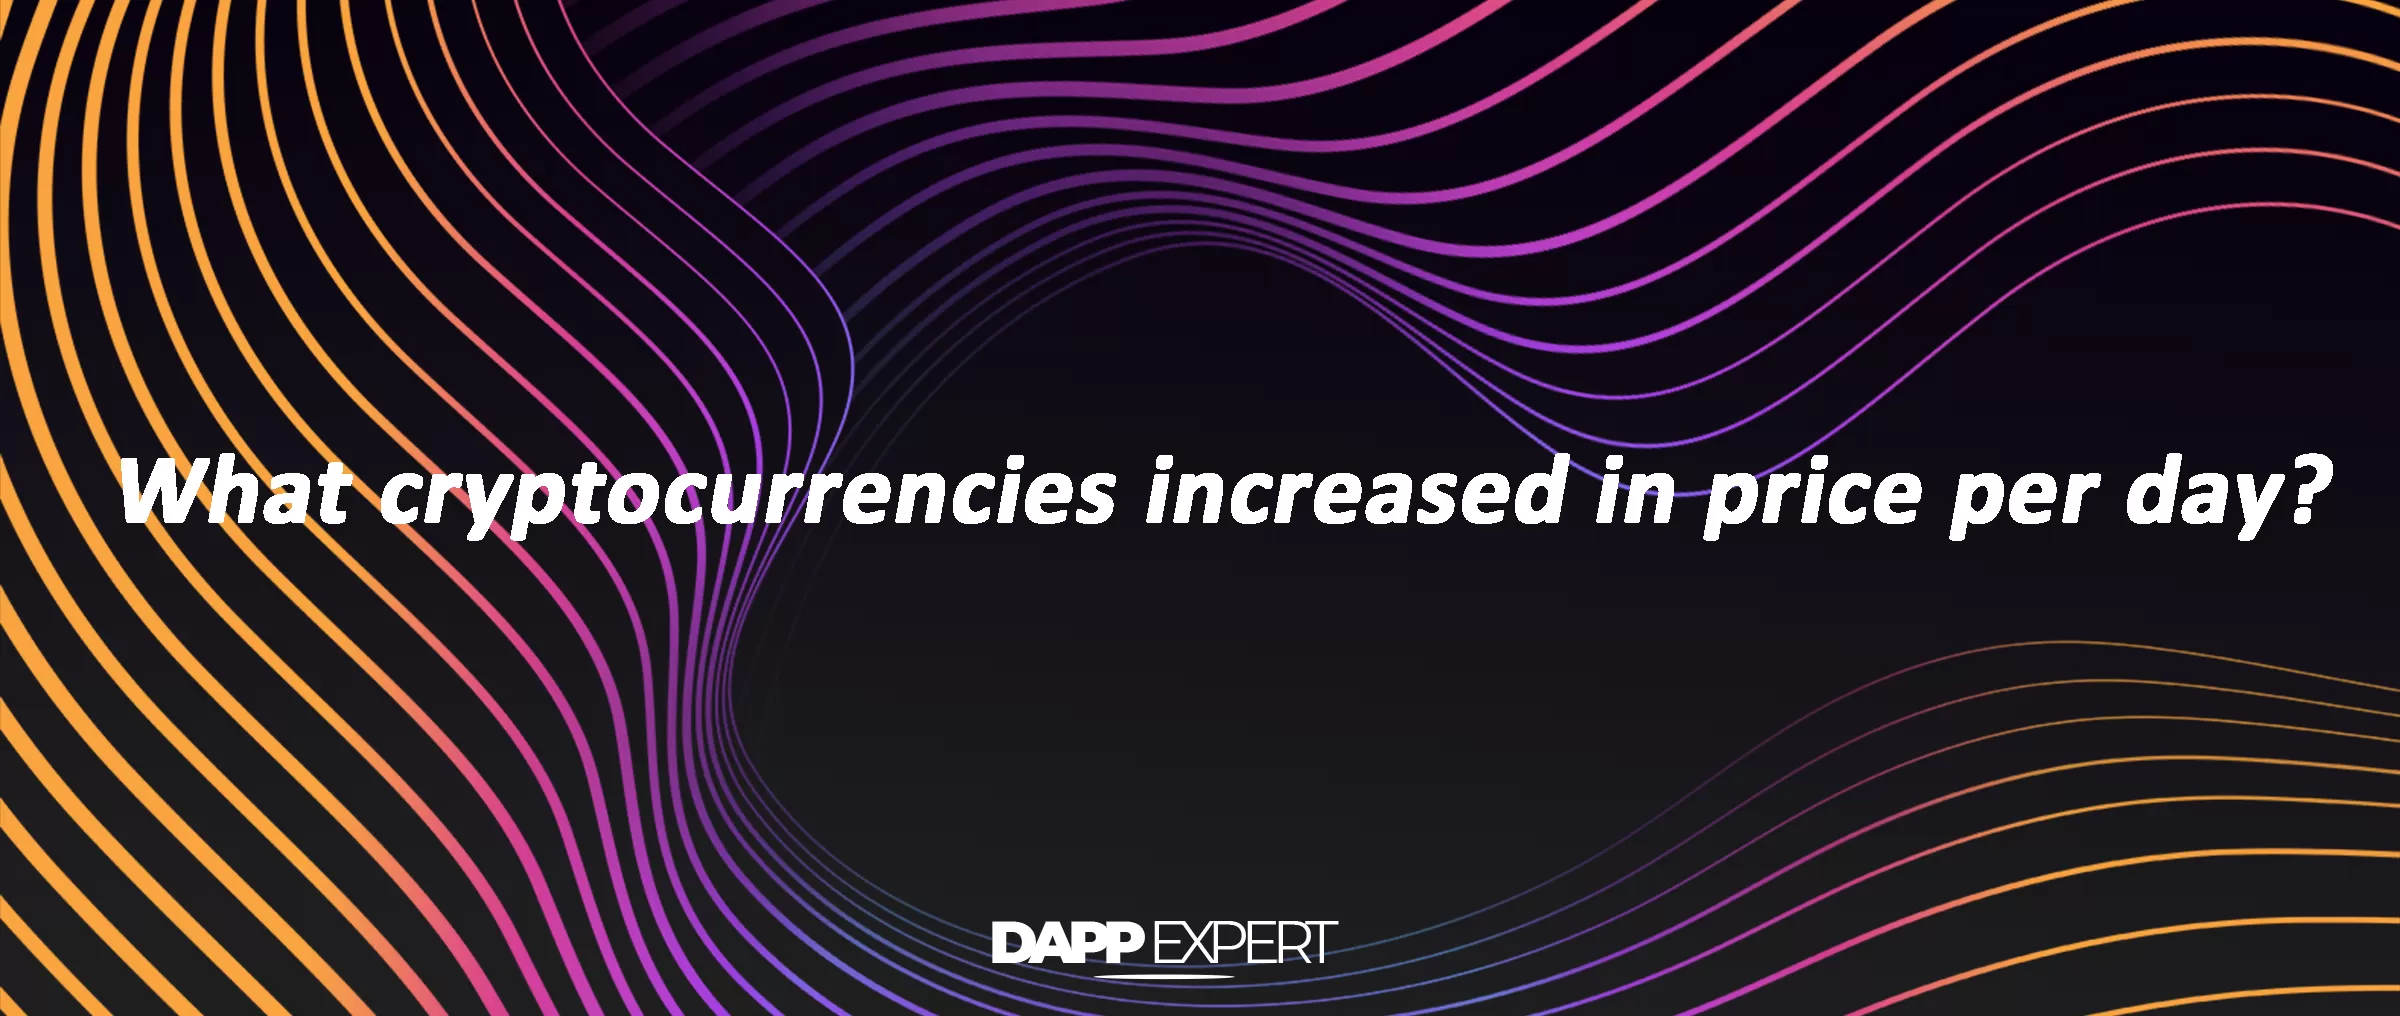 What cryptocurrencies increased in price per day?